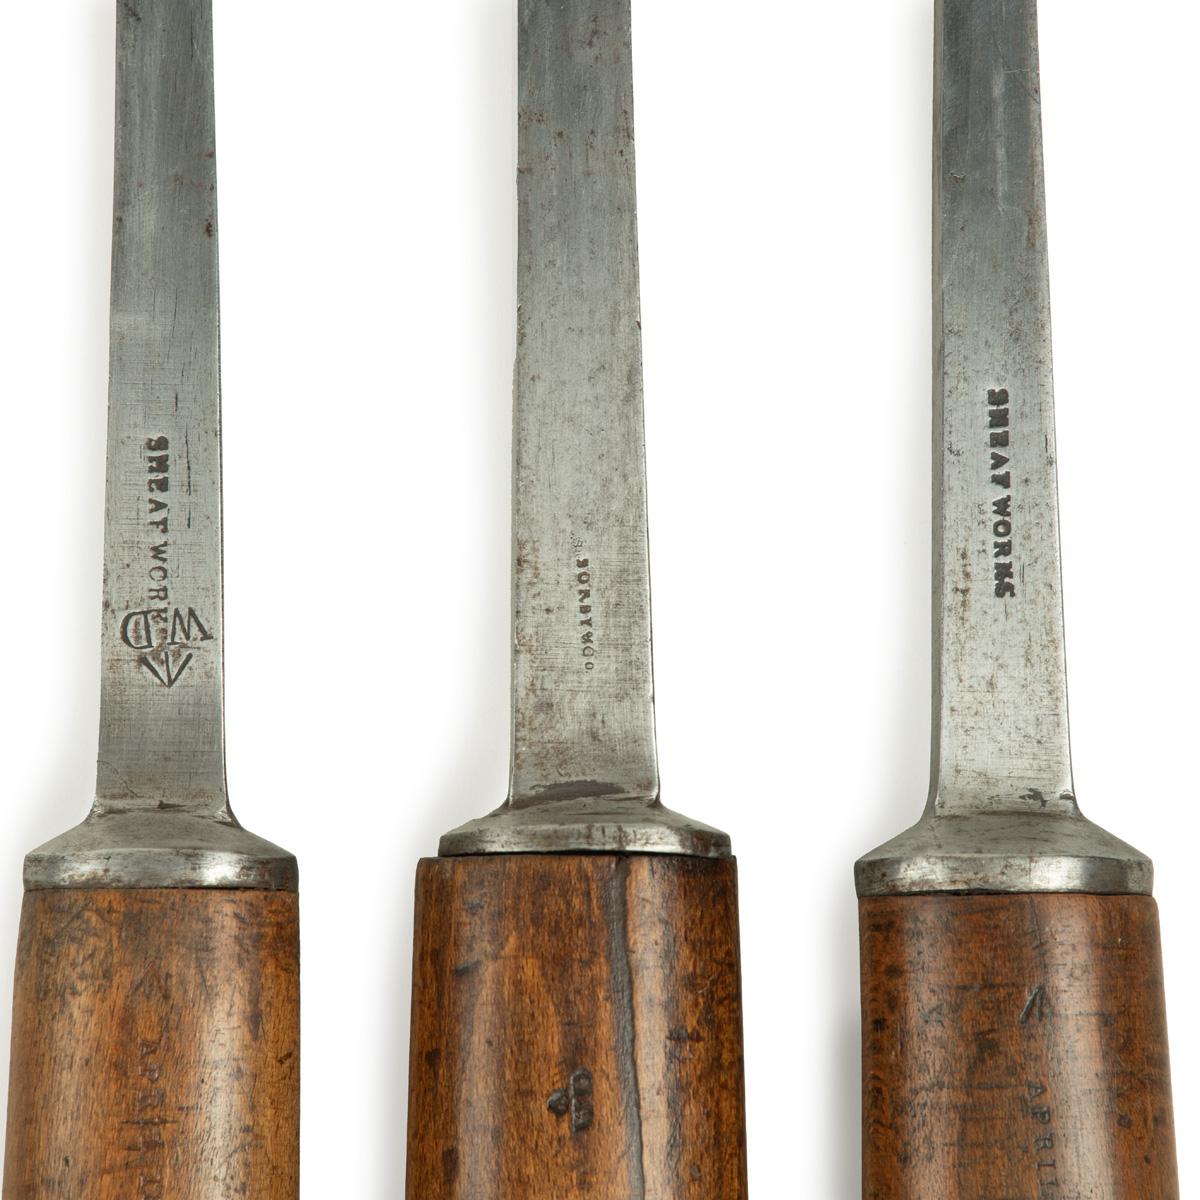 Three mortice chisels